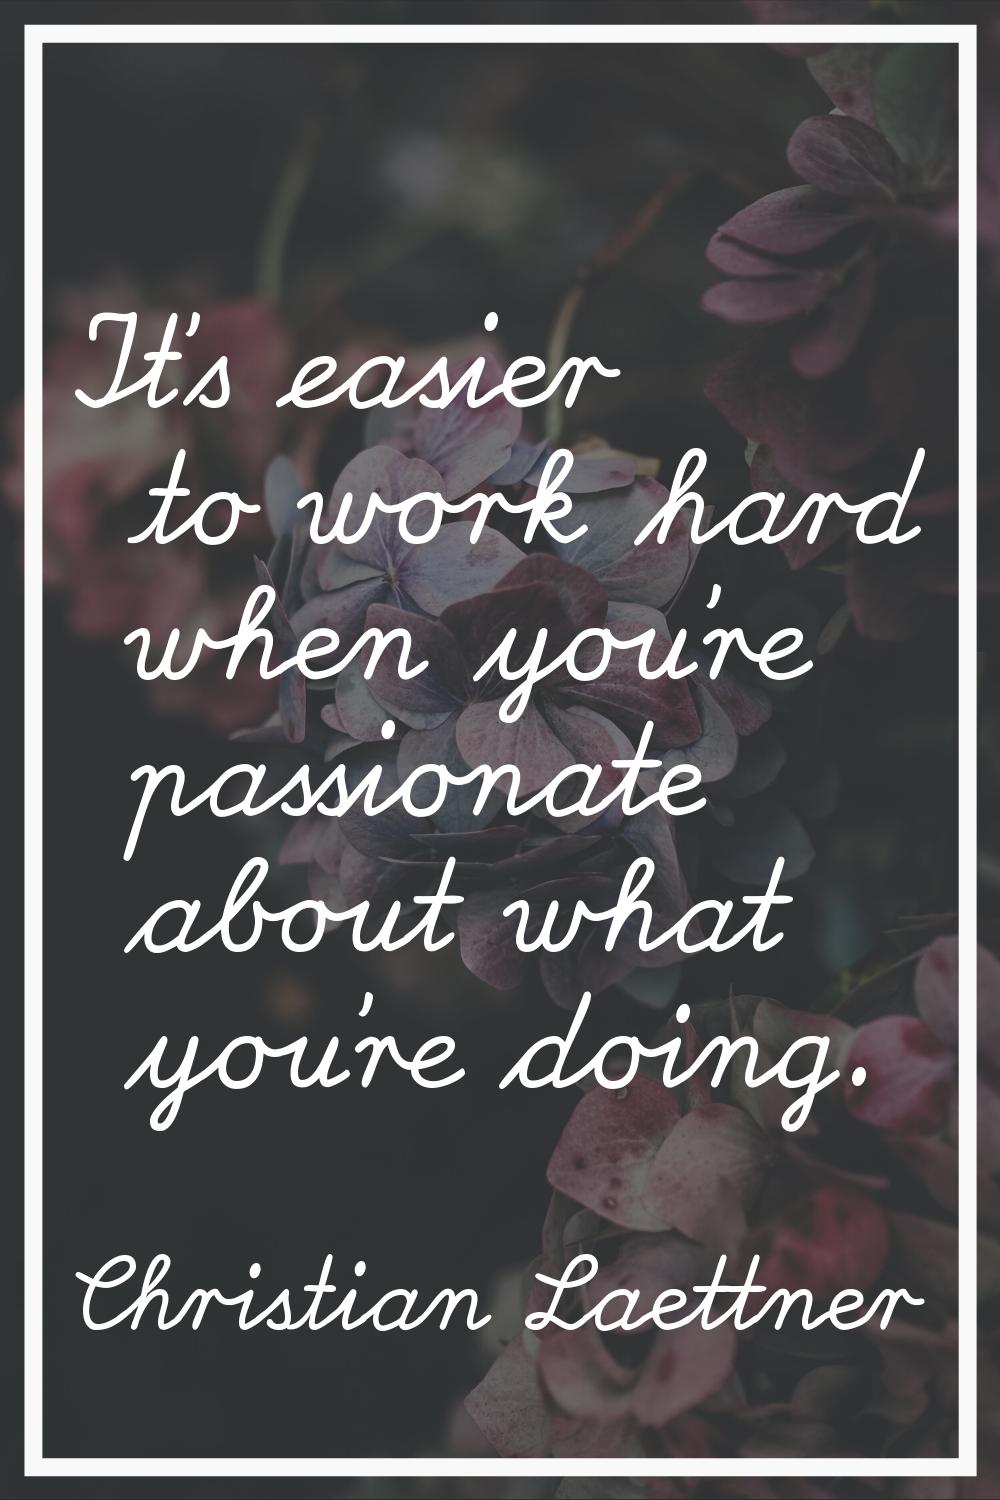 It's easier to work hard when you're passionate about what you're doing.